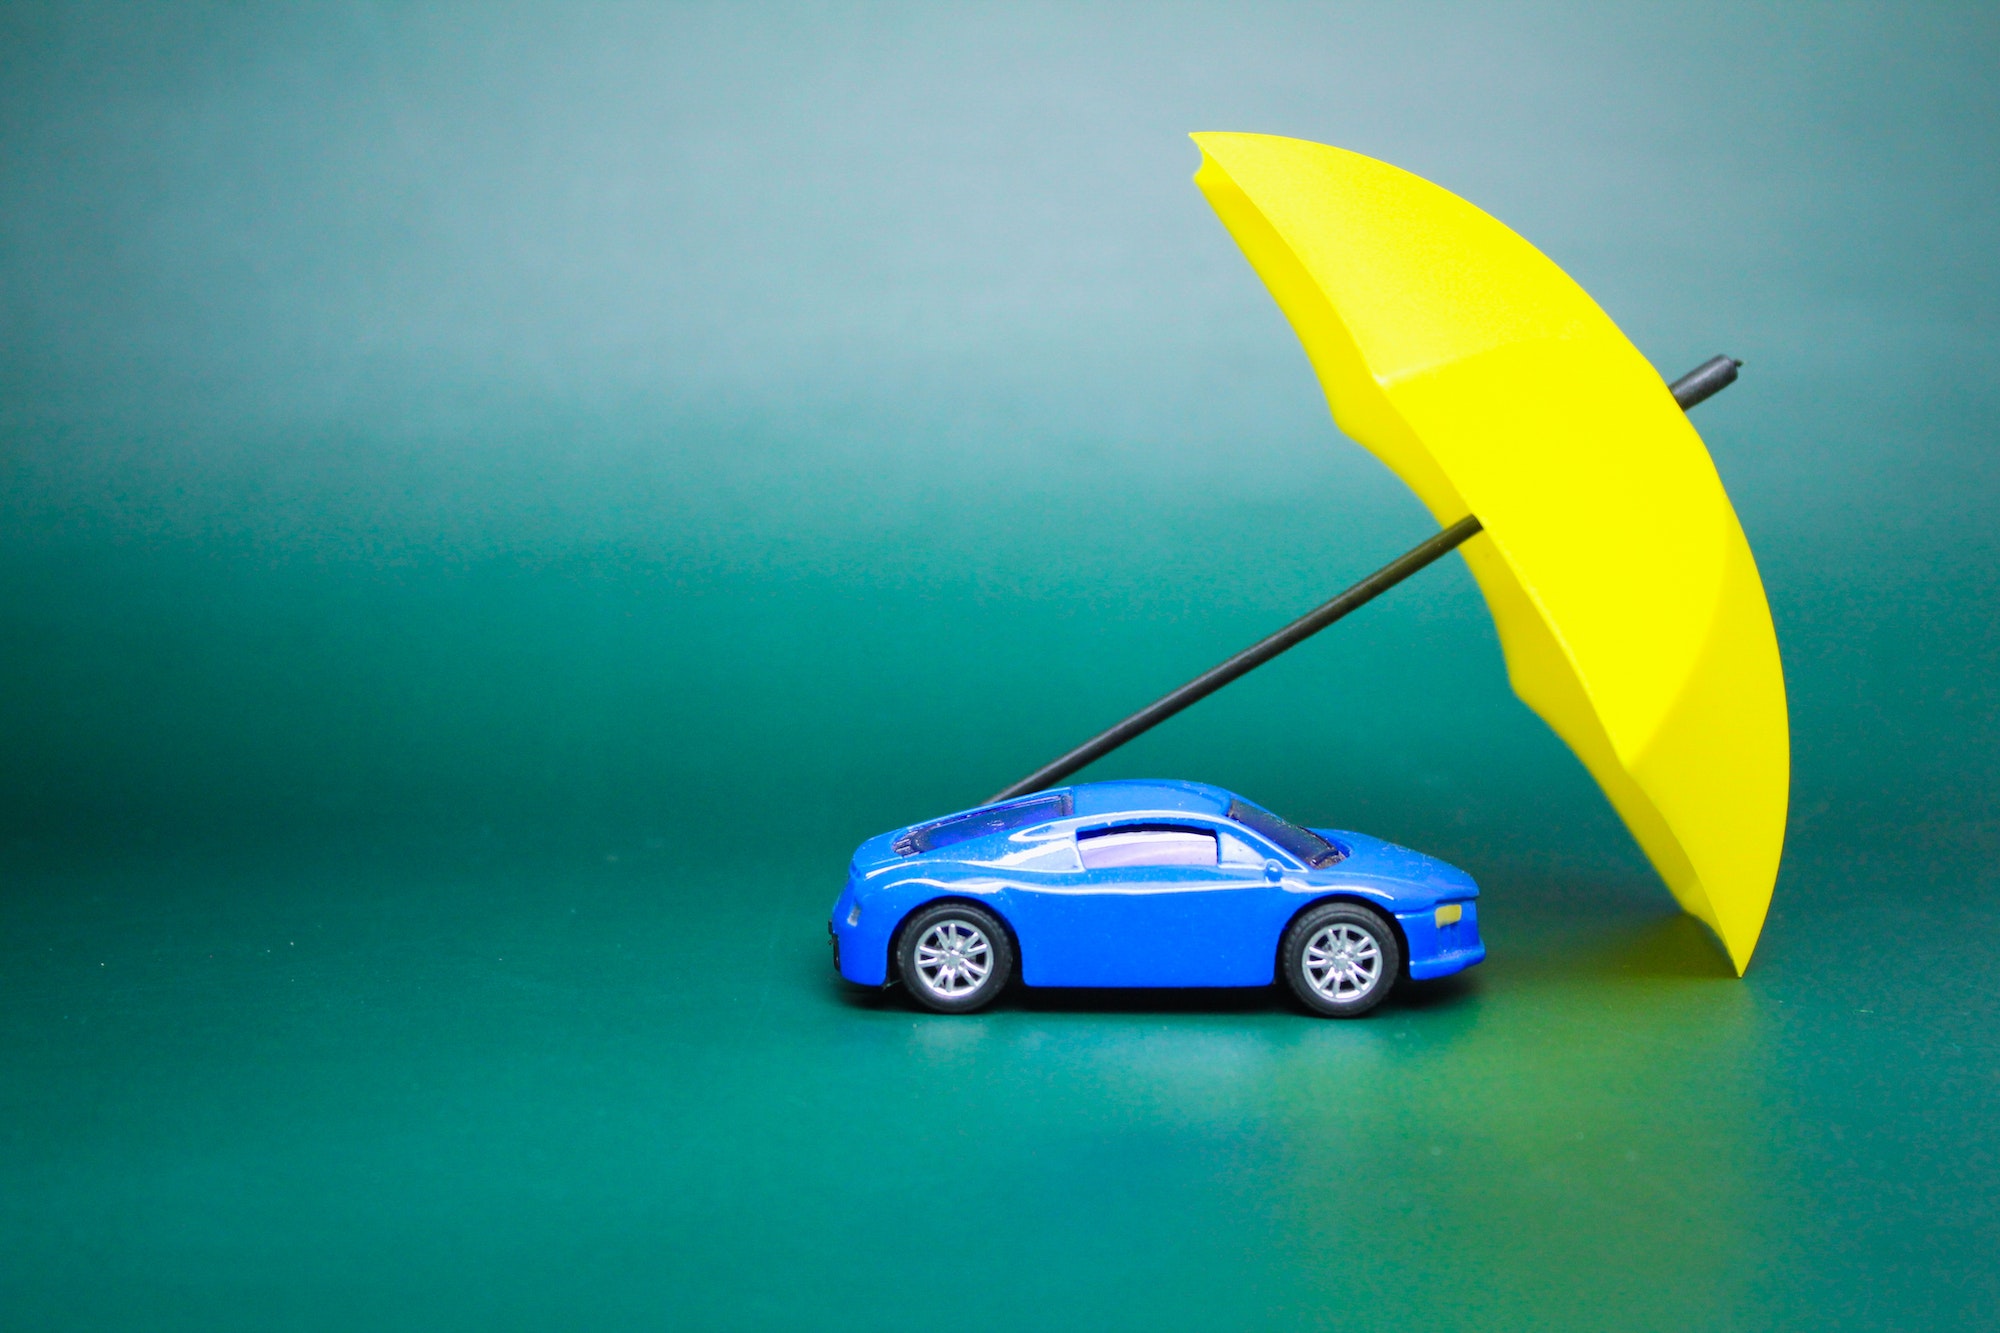 small car model covered by an umbrella. vehicle insurance concept